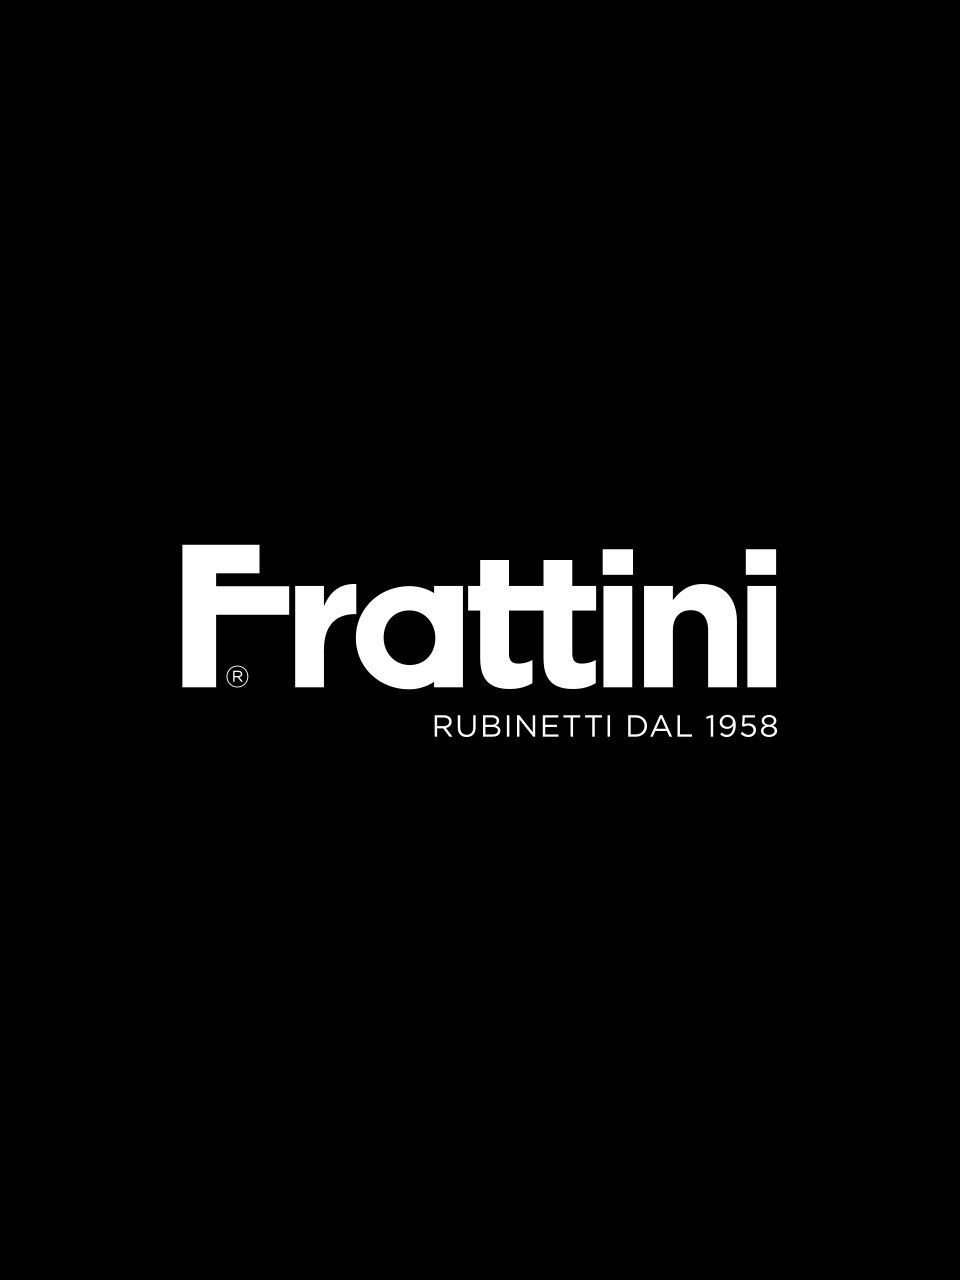 The future starts with F as Frattini